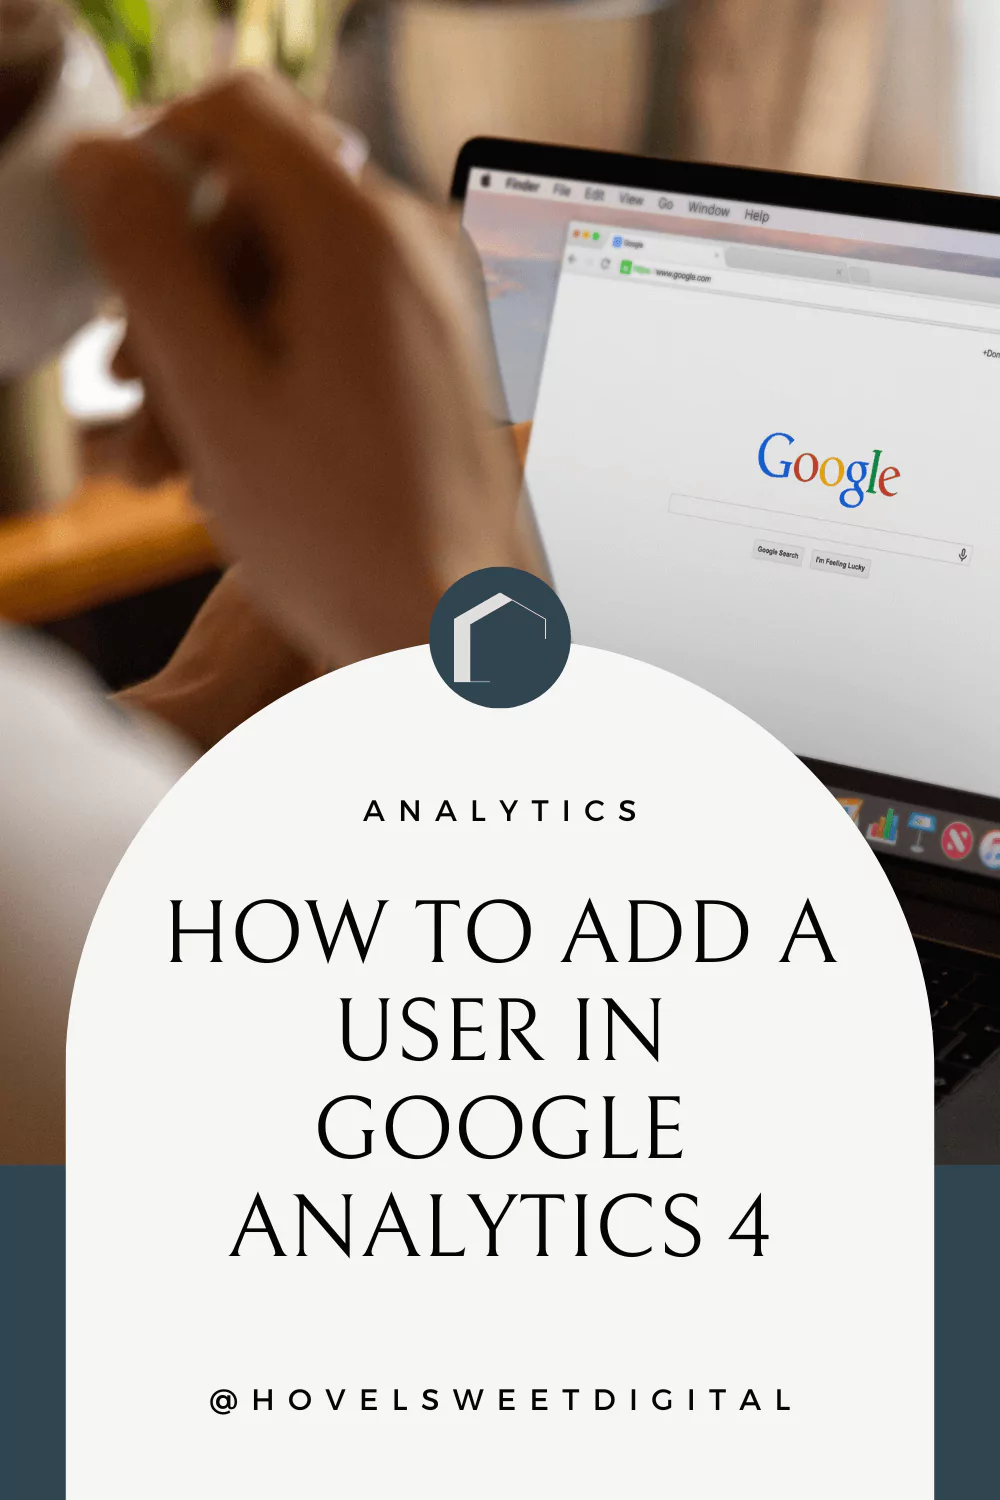 How to Add a User in Google Analytics 4